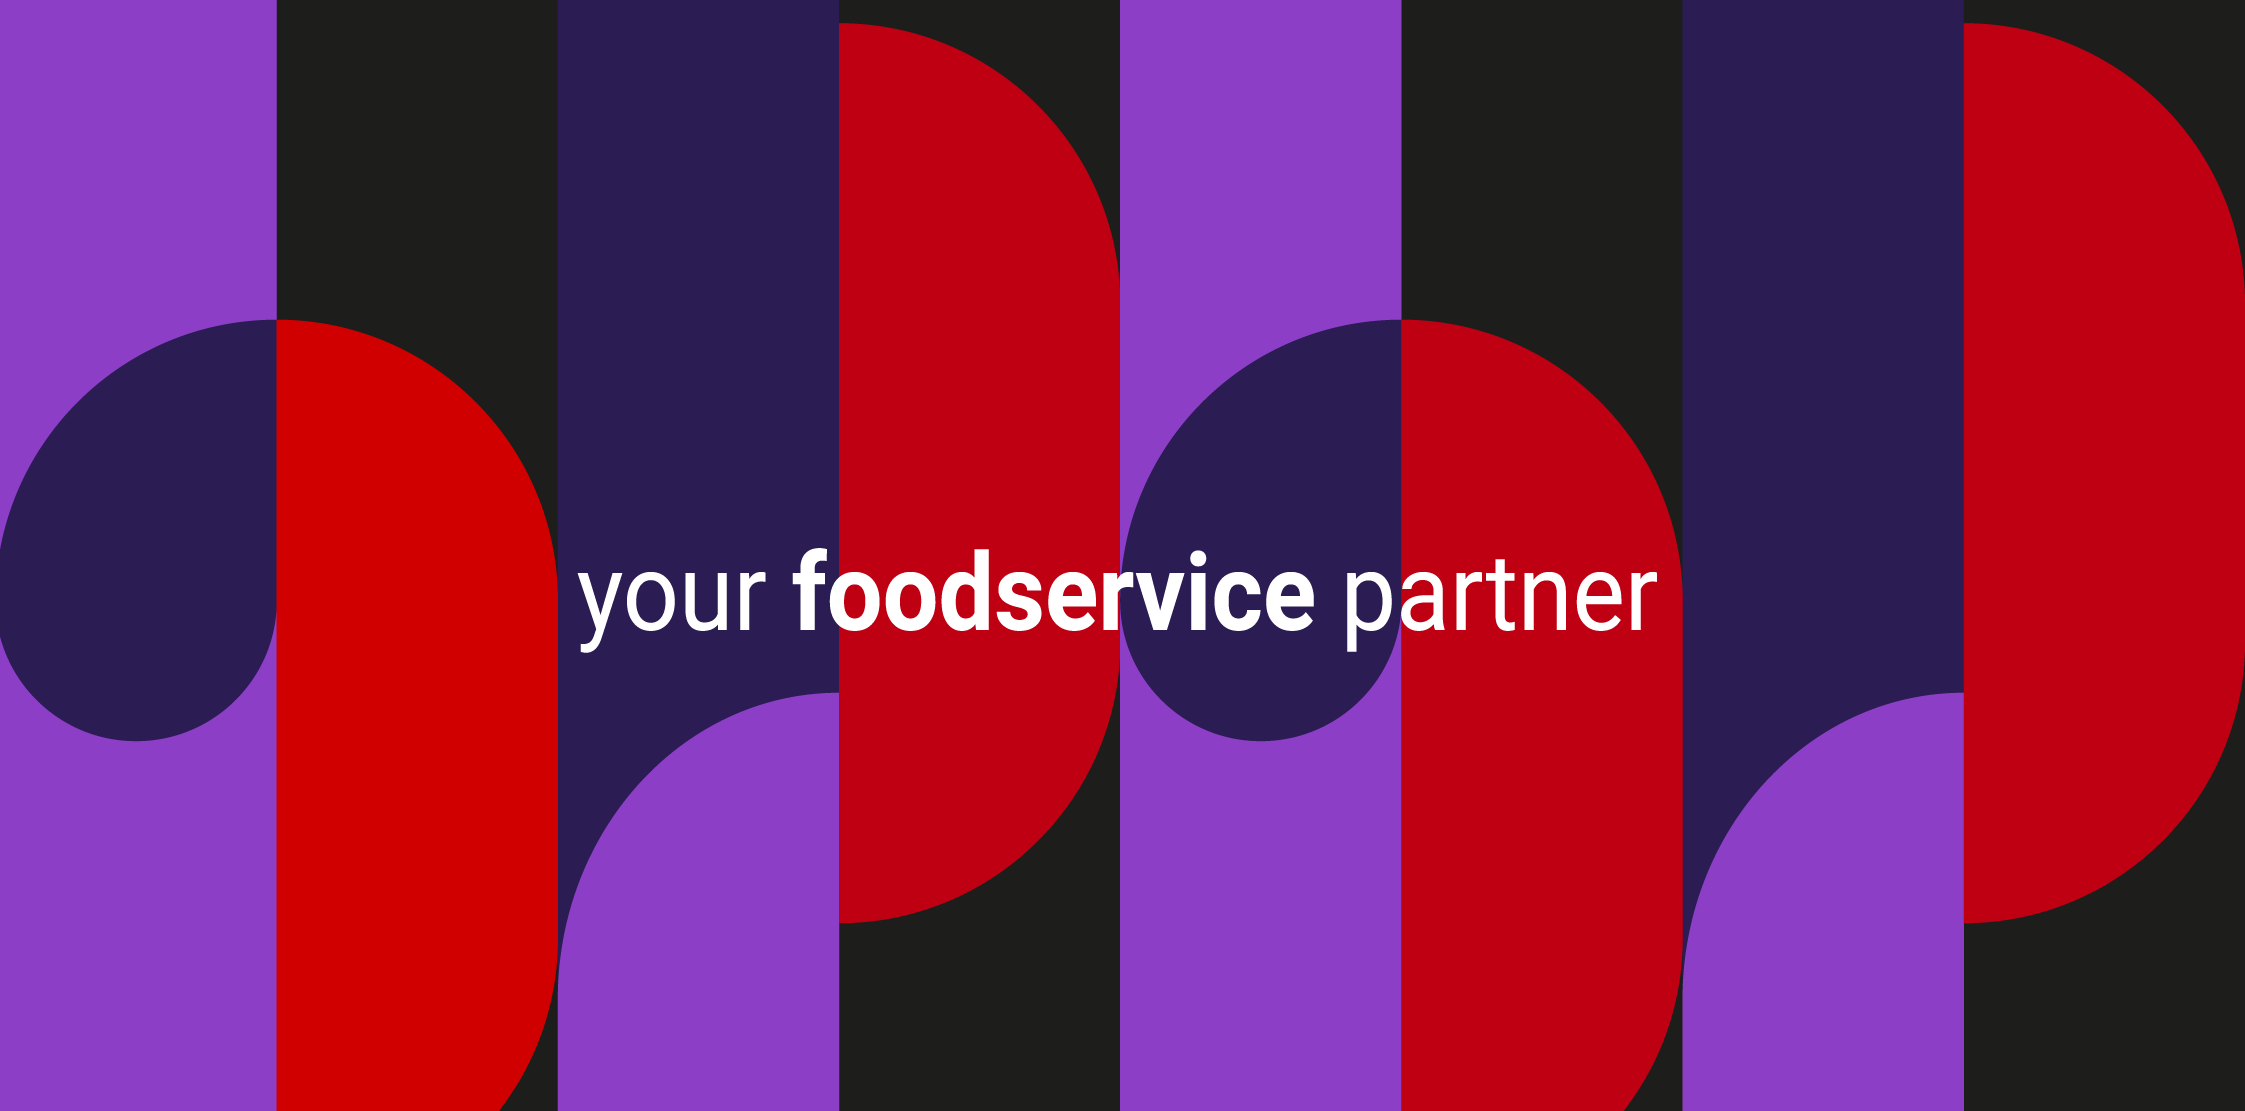 GFA group - Your foodservice partner